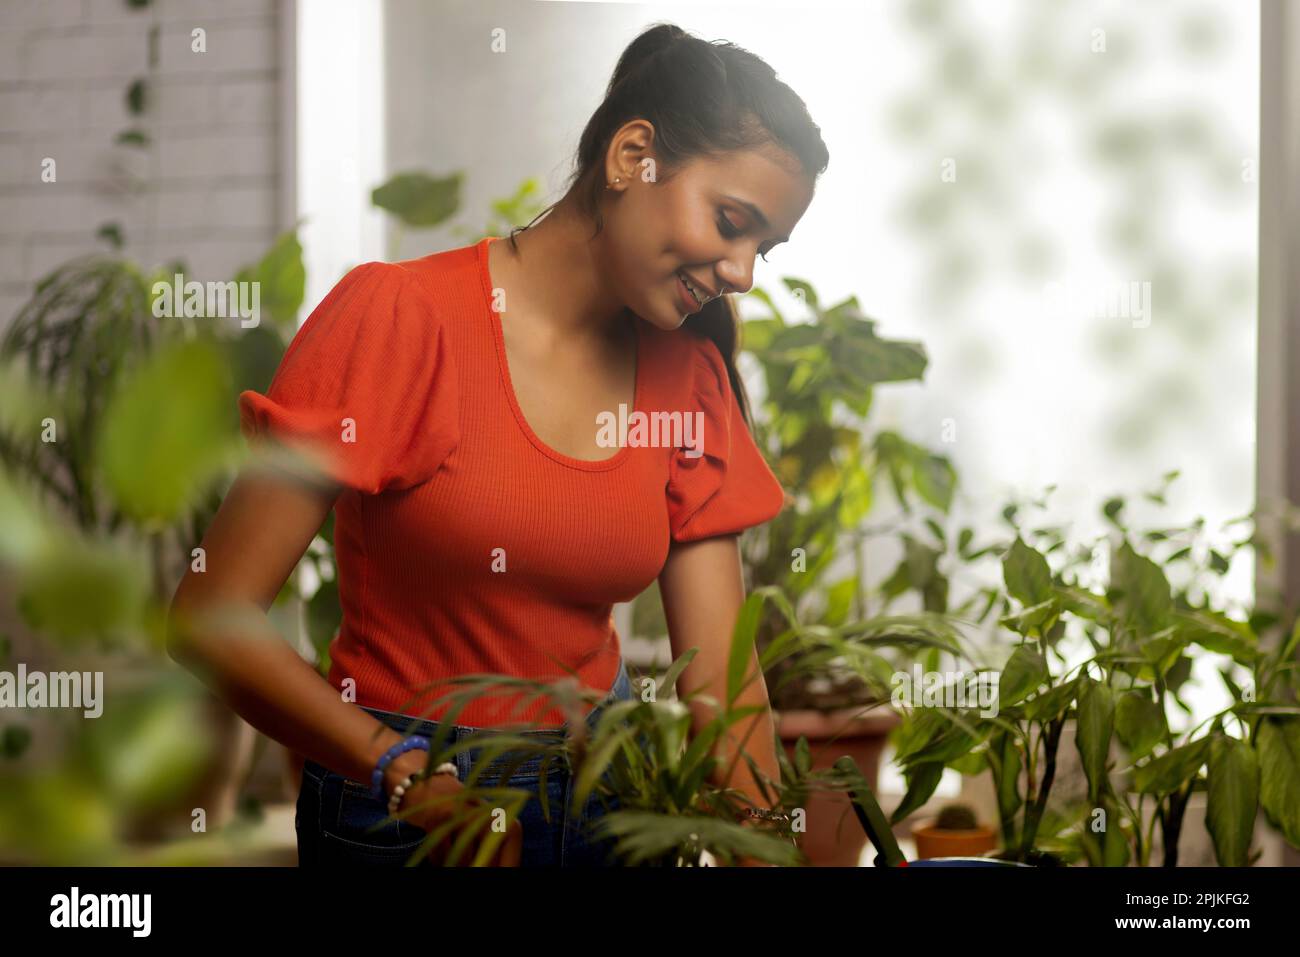 Portrait of a young woman gardening at home Stock Photo